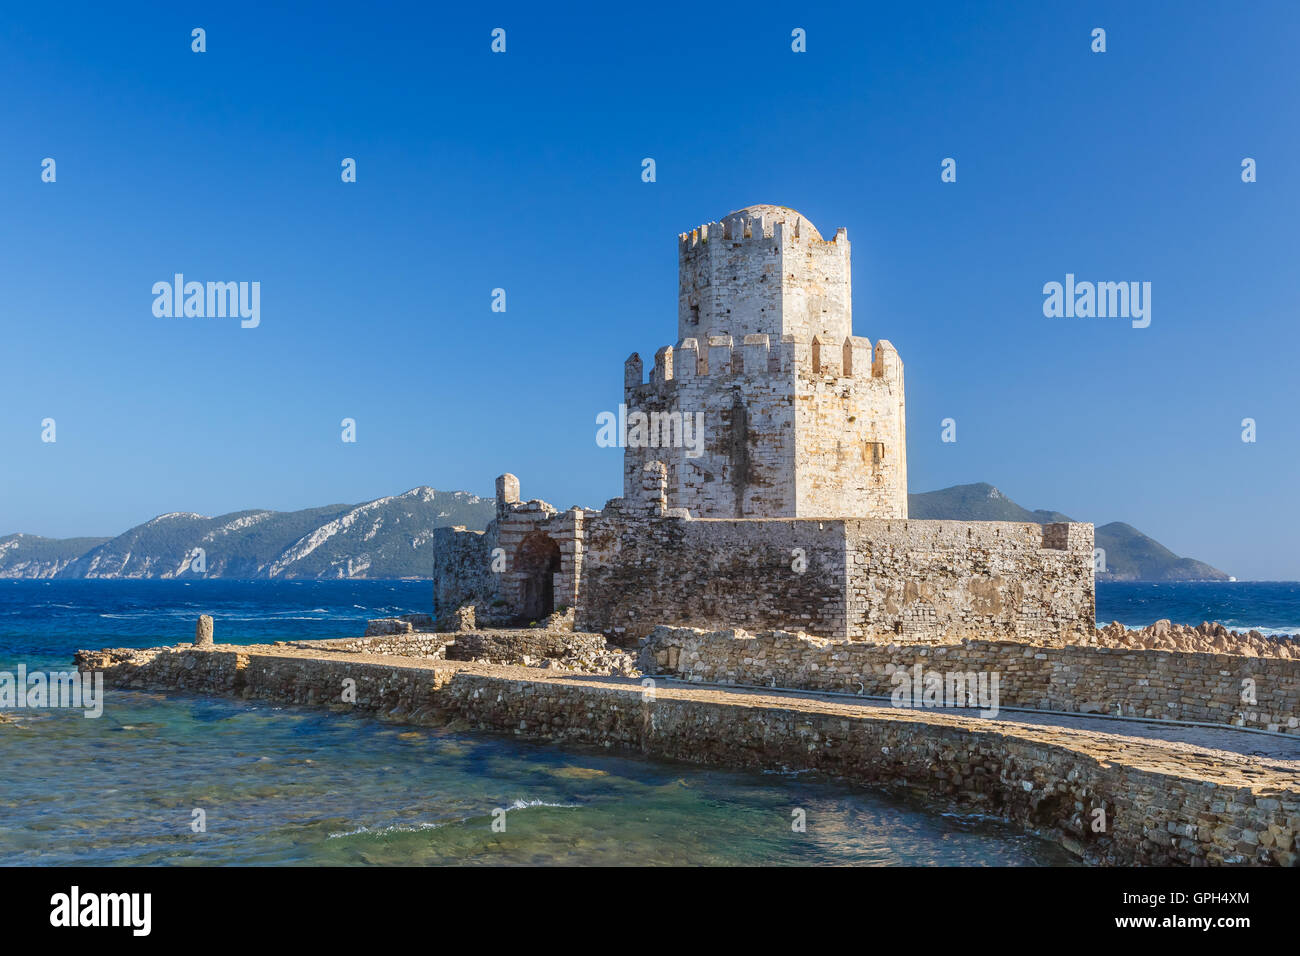 The Bourtzi tower in Methoni Venetian Fortress against a blue sky in the Peloponnese, Messinia, Greece Stock Photo